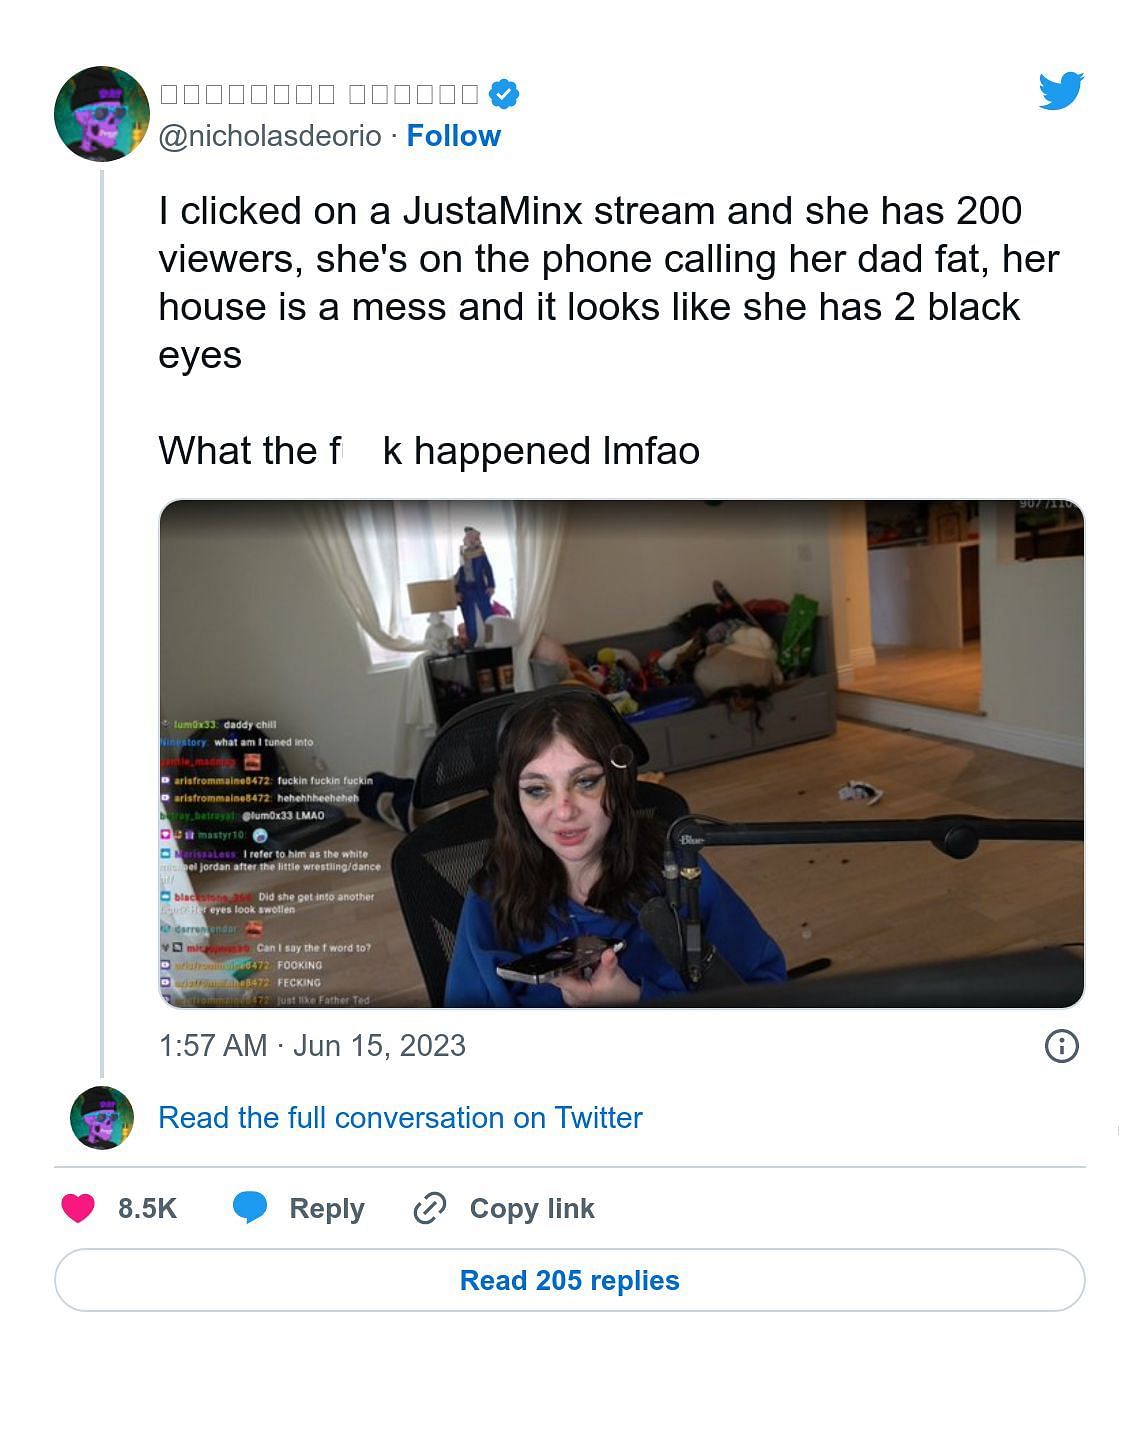 Justaminx gives an update on her mental well-being after being